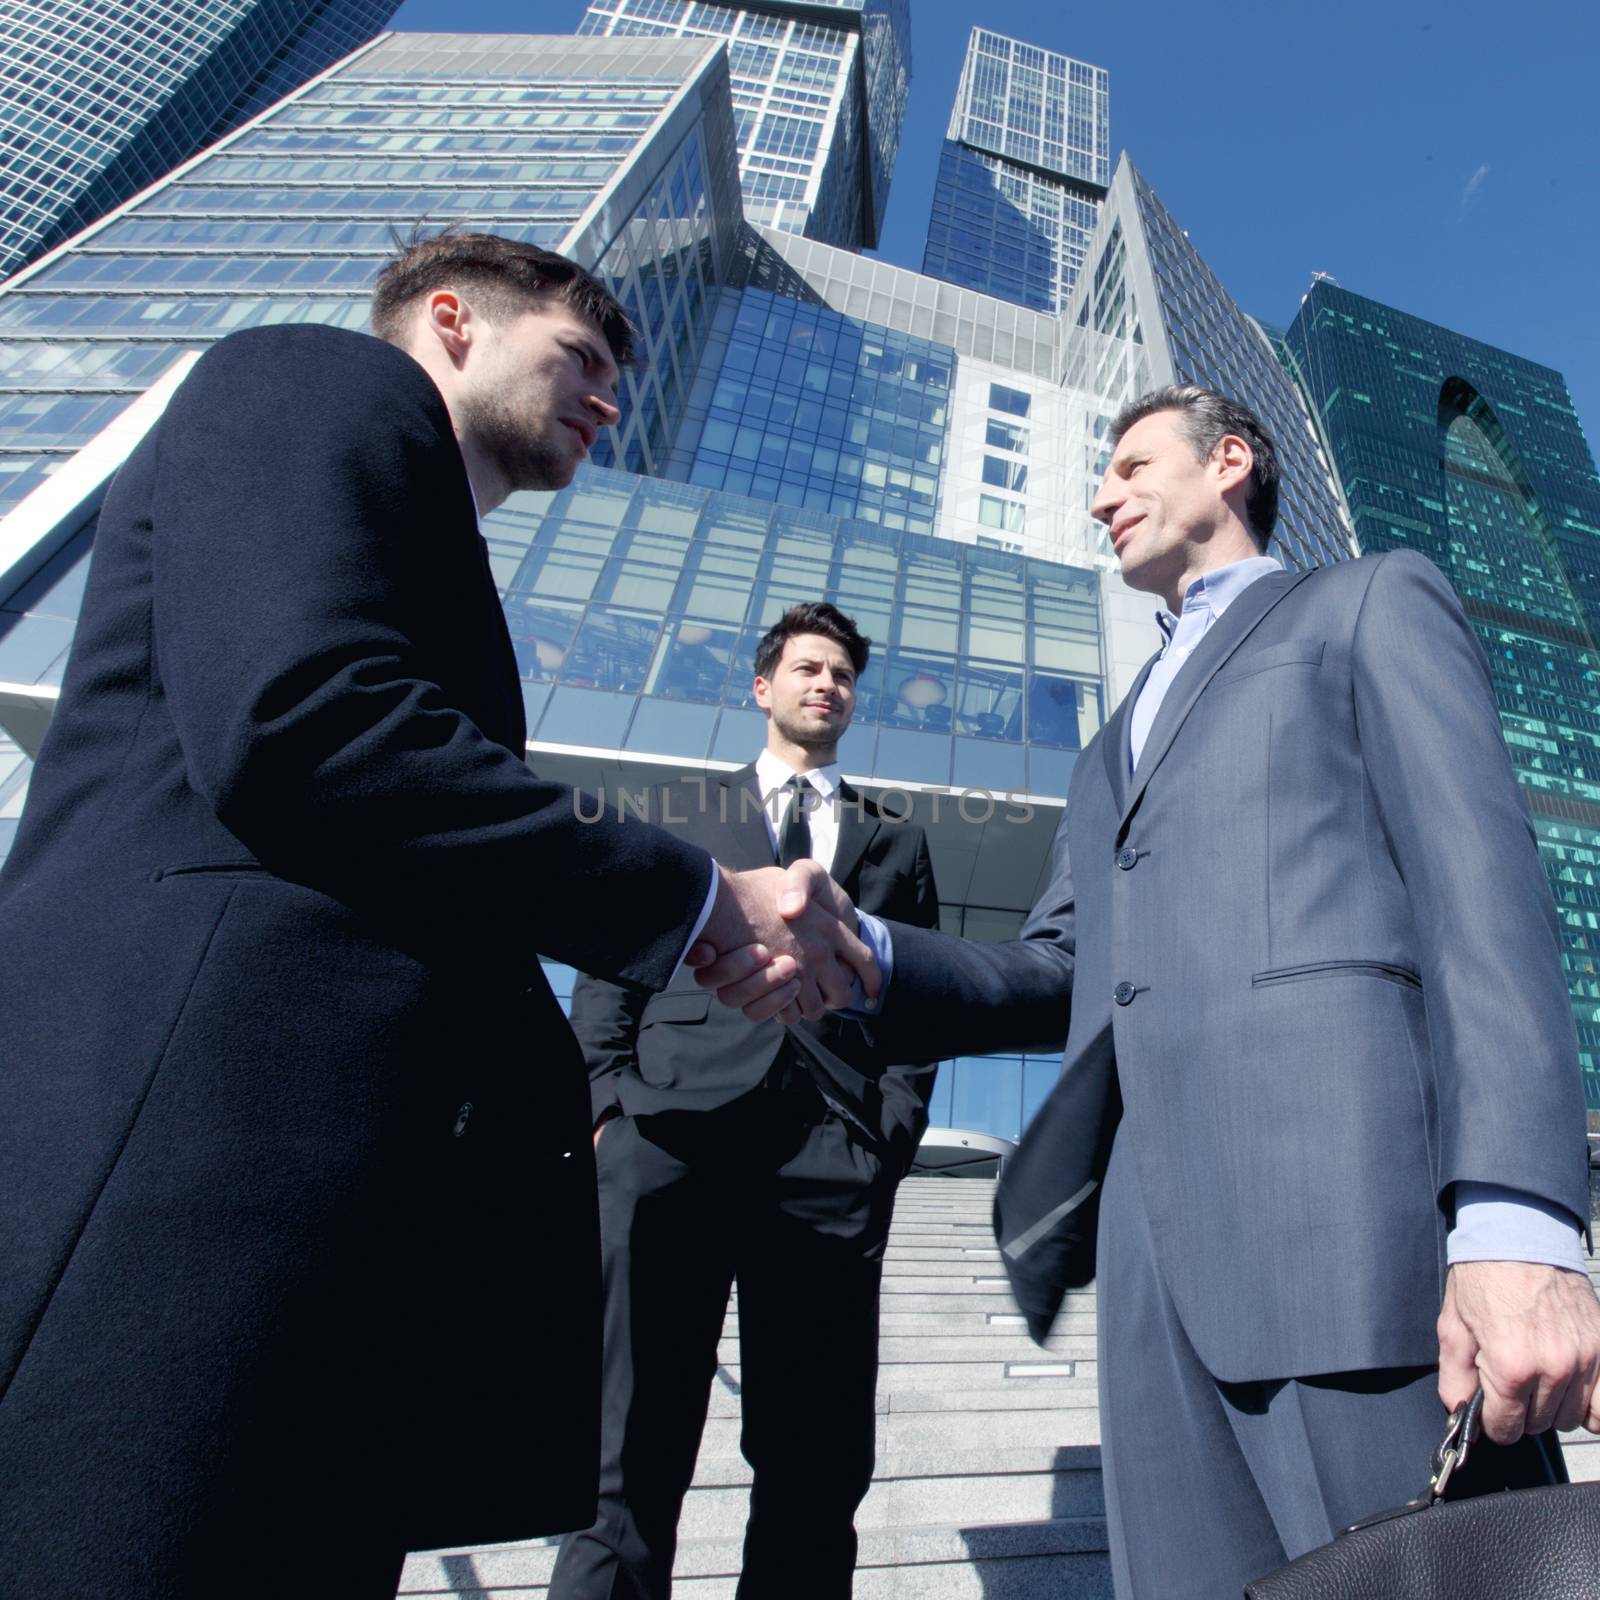 Business people shaking hands, finishing up a meeting outside office